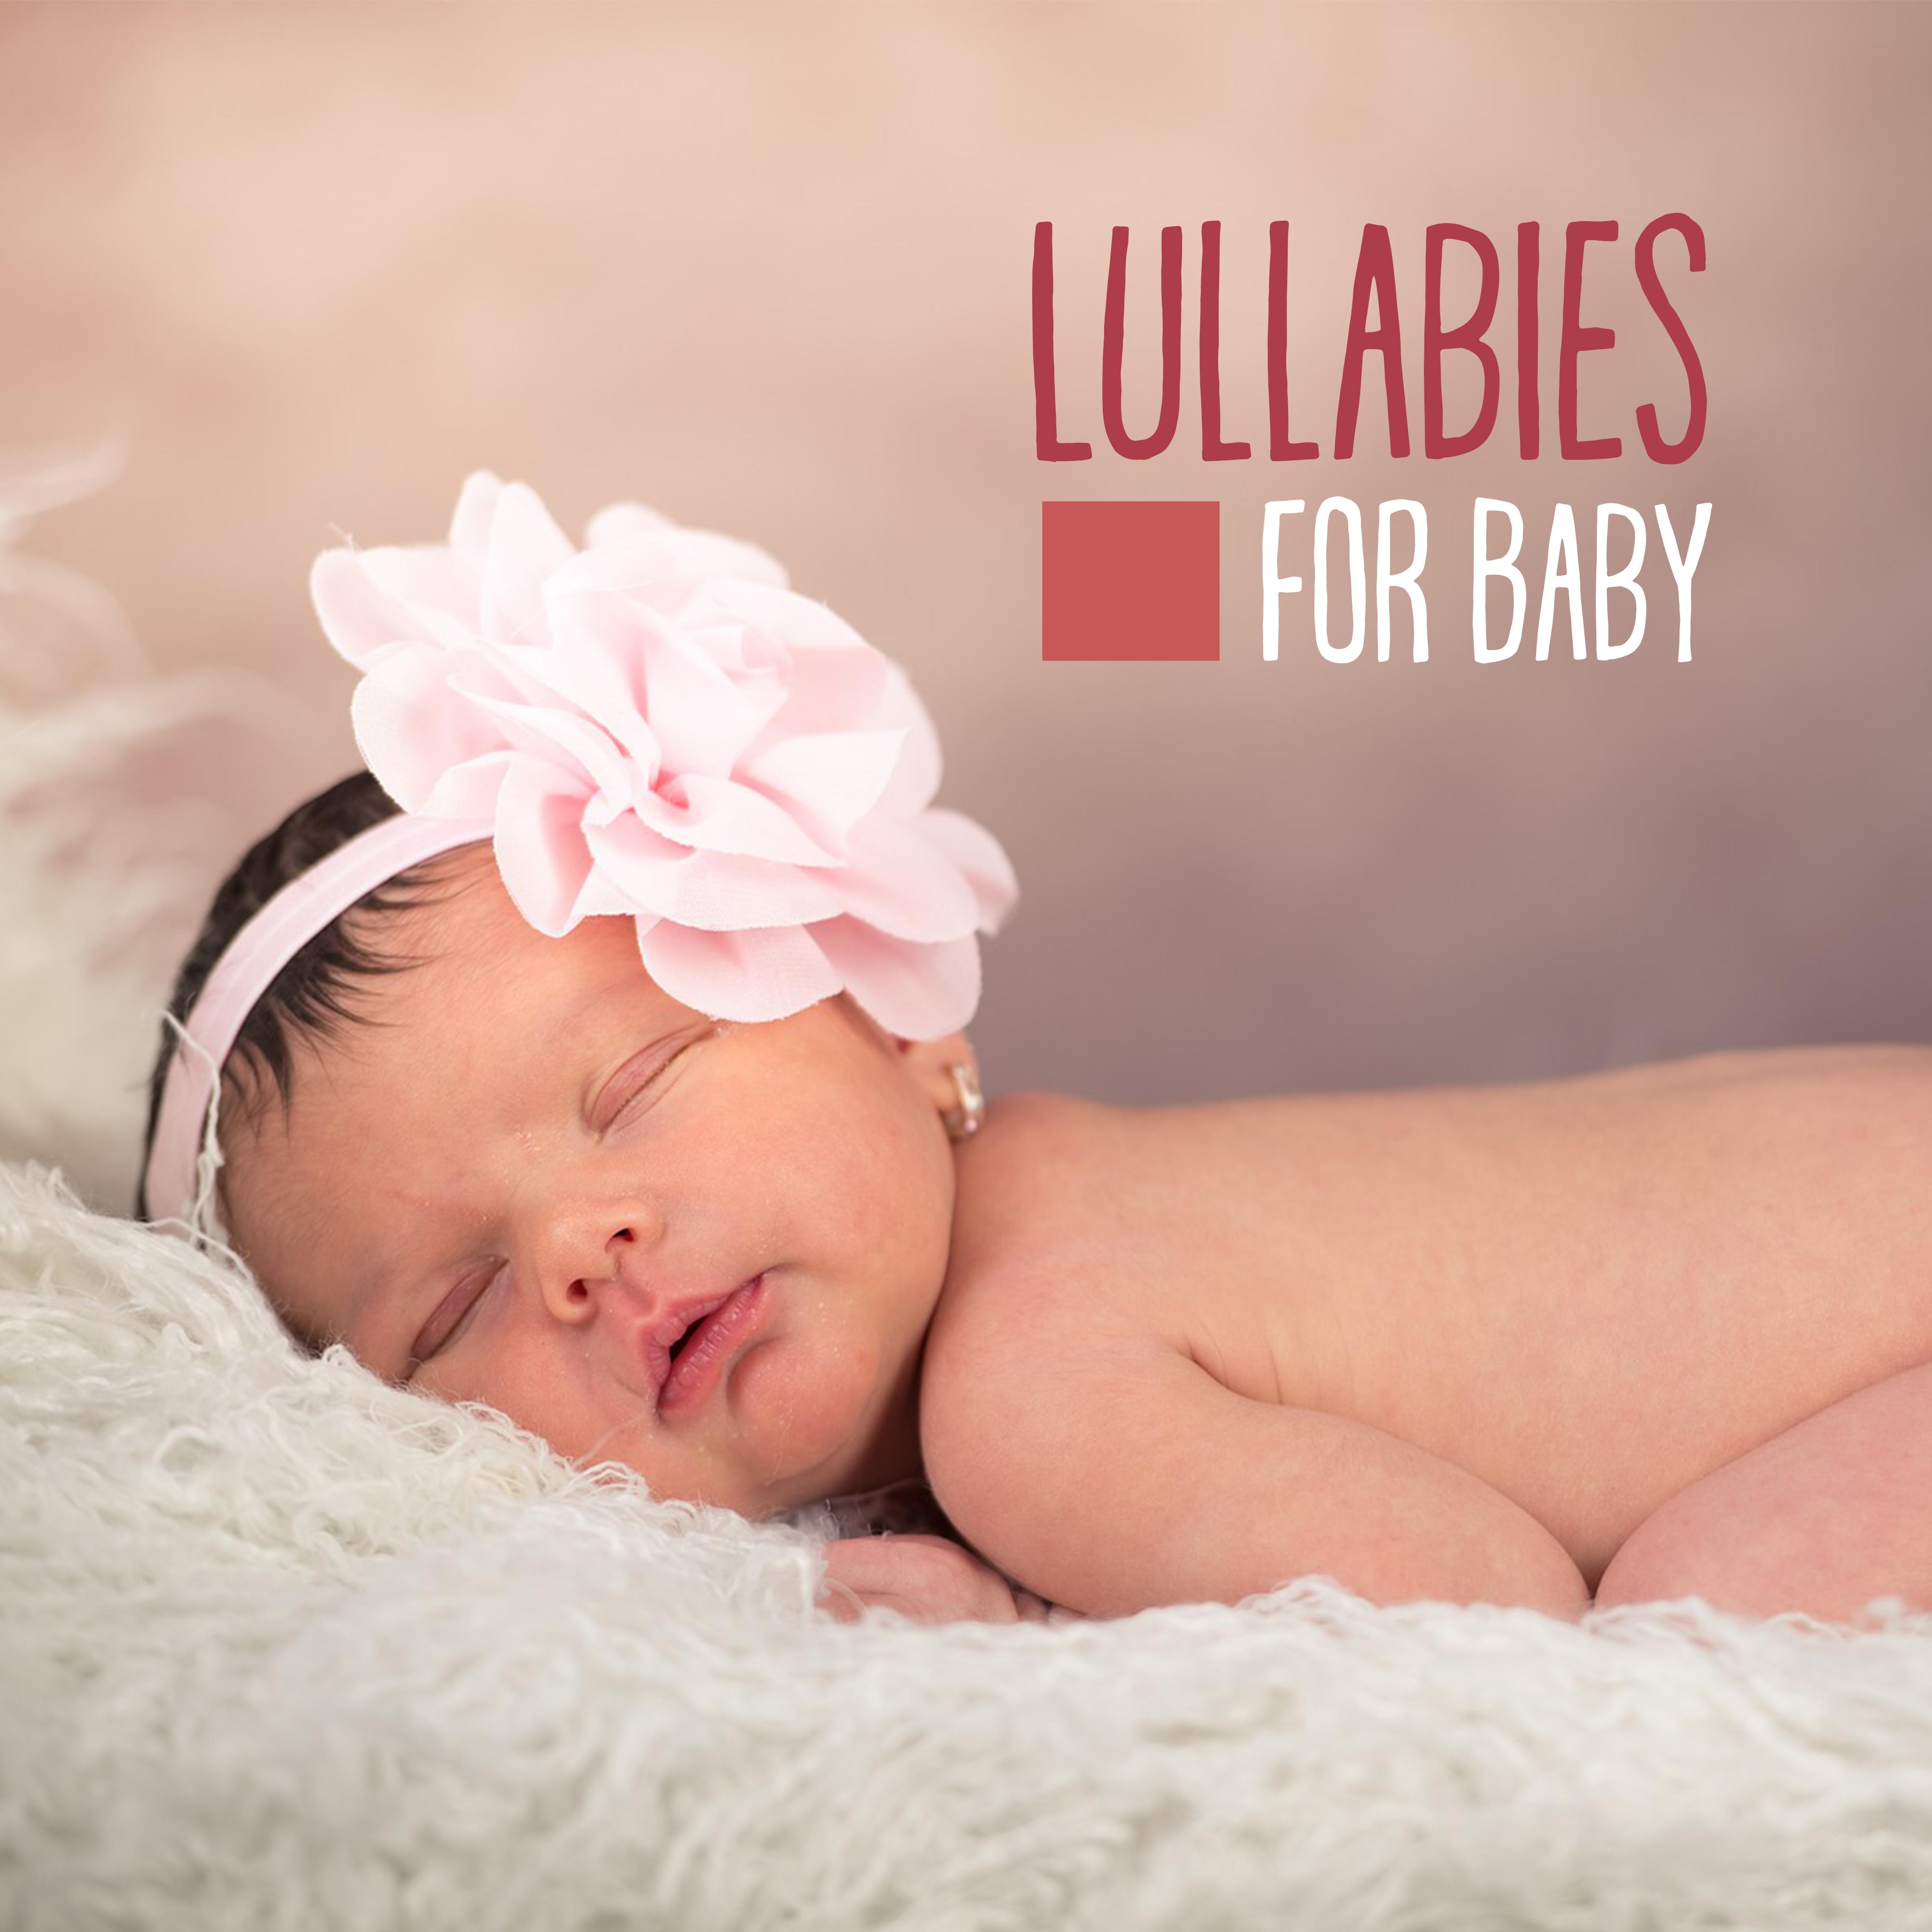 Lullabies for Baby  Soothing and Relaxing Music for Baby Sleep, Cradle Songs, Sweet Dreams, Piano Lullabies with Nature Sounds, Bedtime